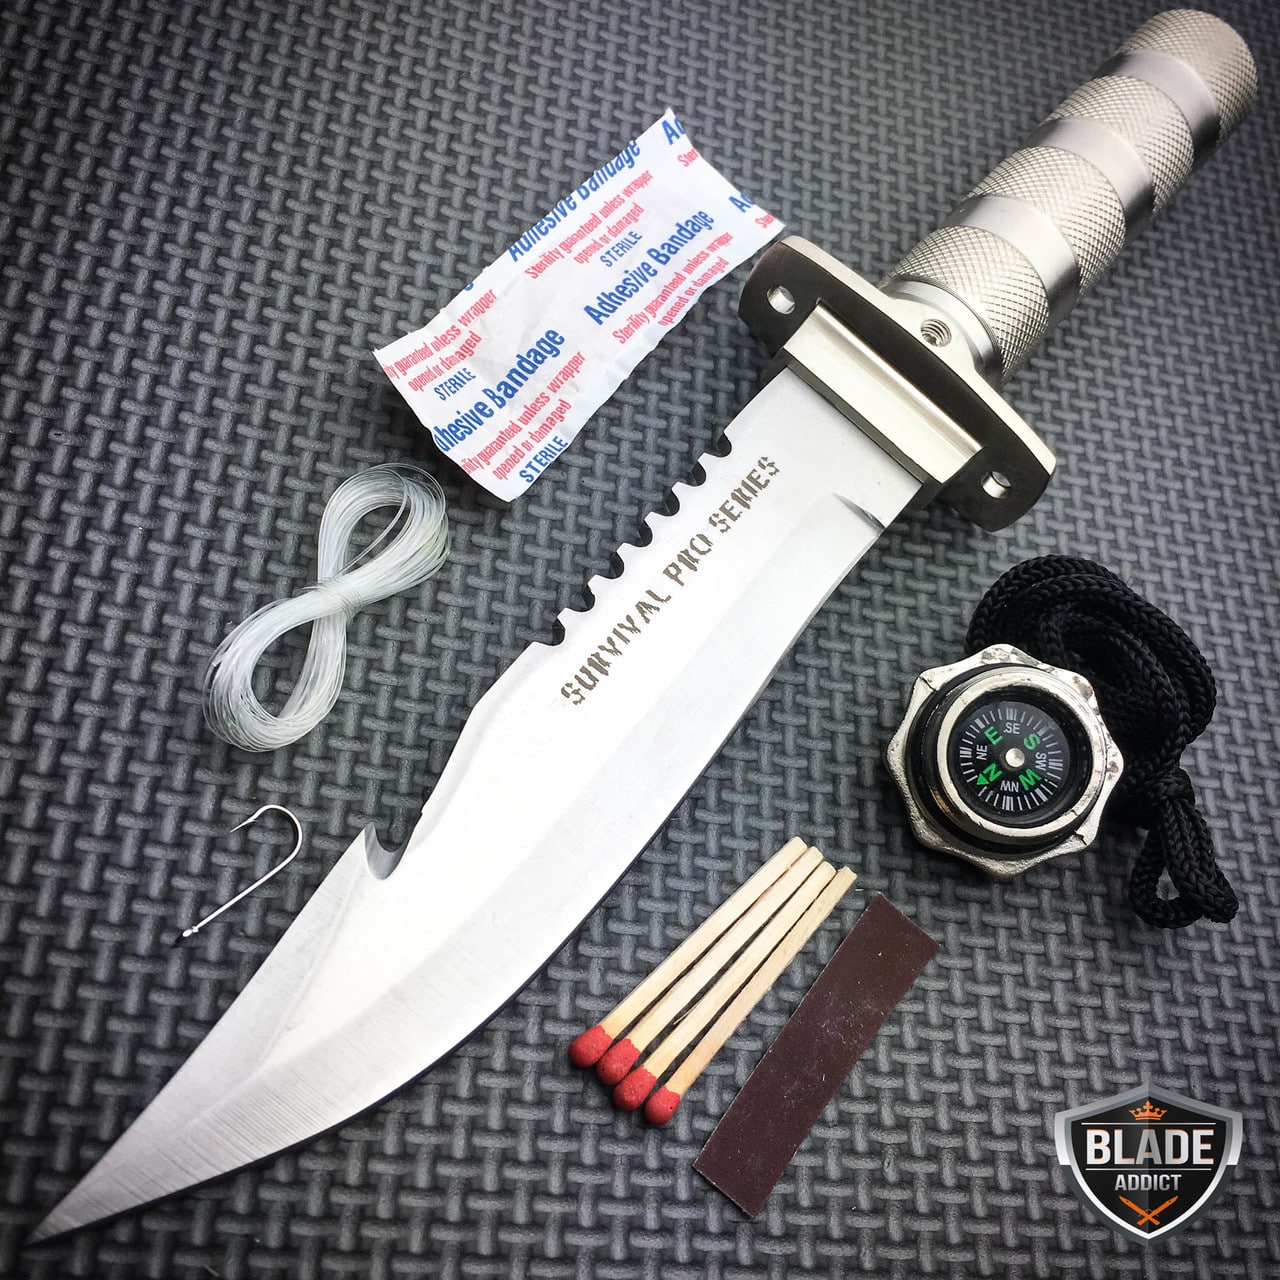 11″ Tactical Fishing Hunting Survival Knife w/ Sheath Bowie Survival Kit Camping